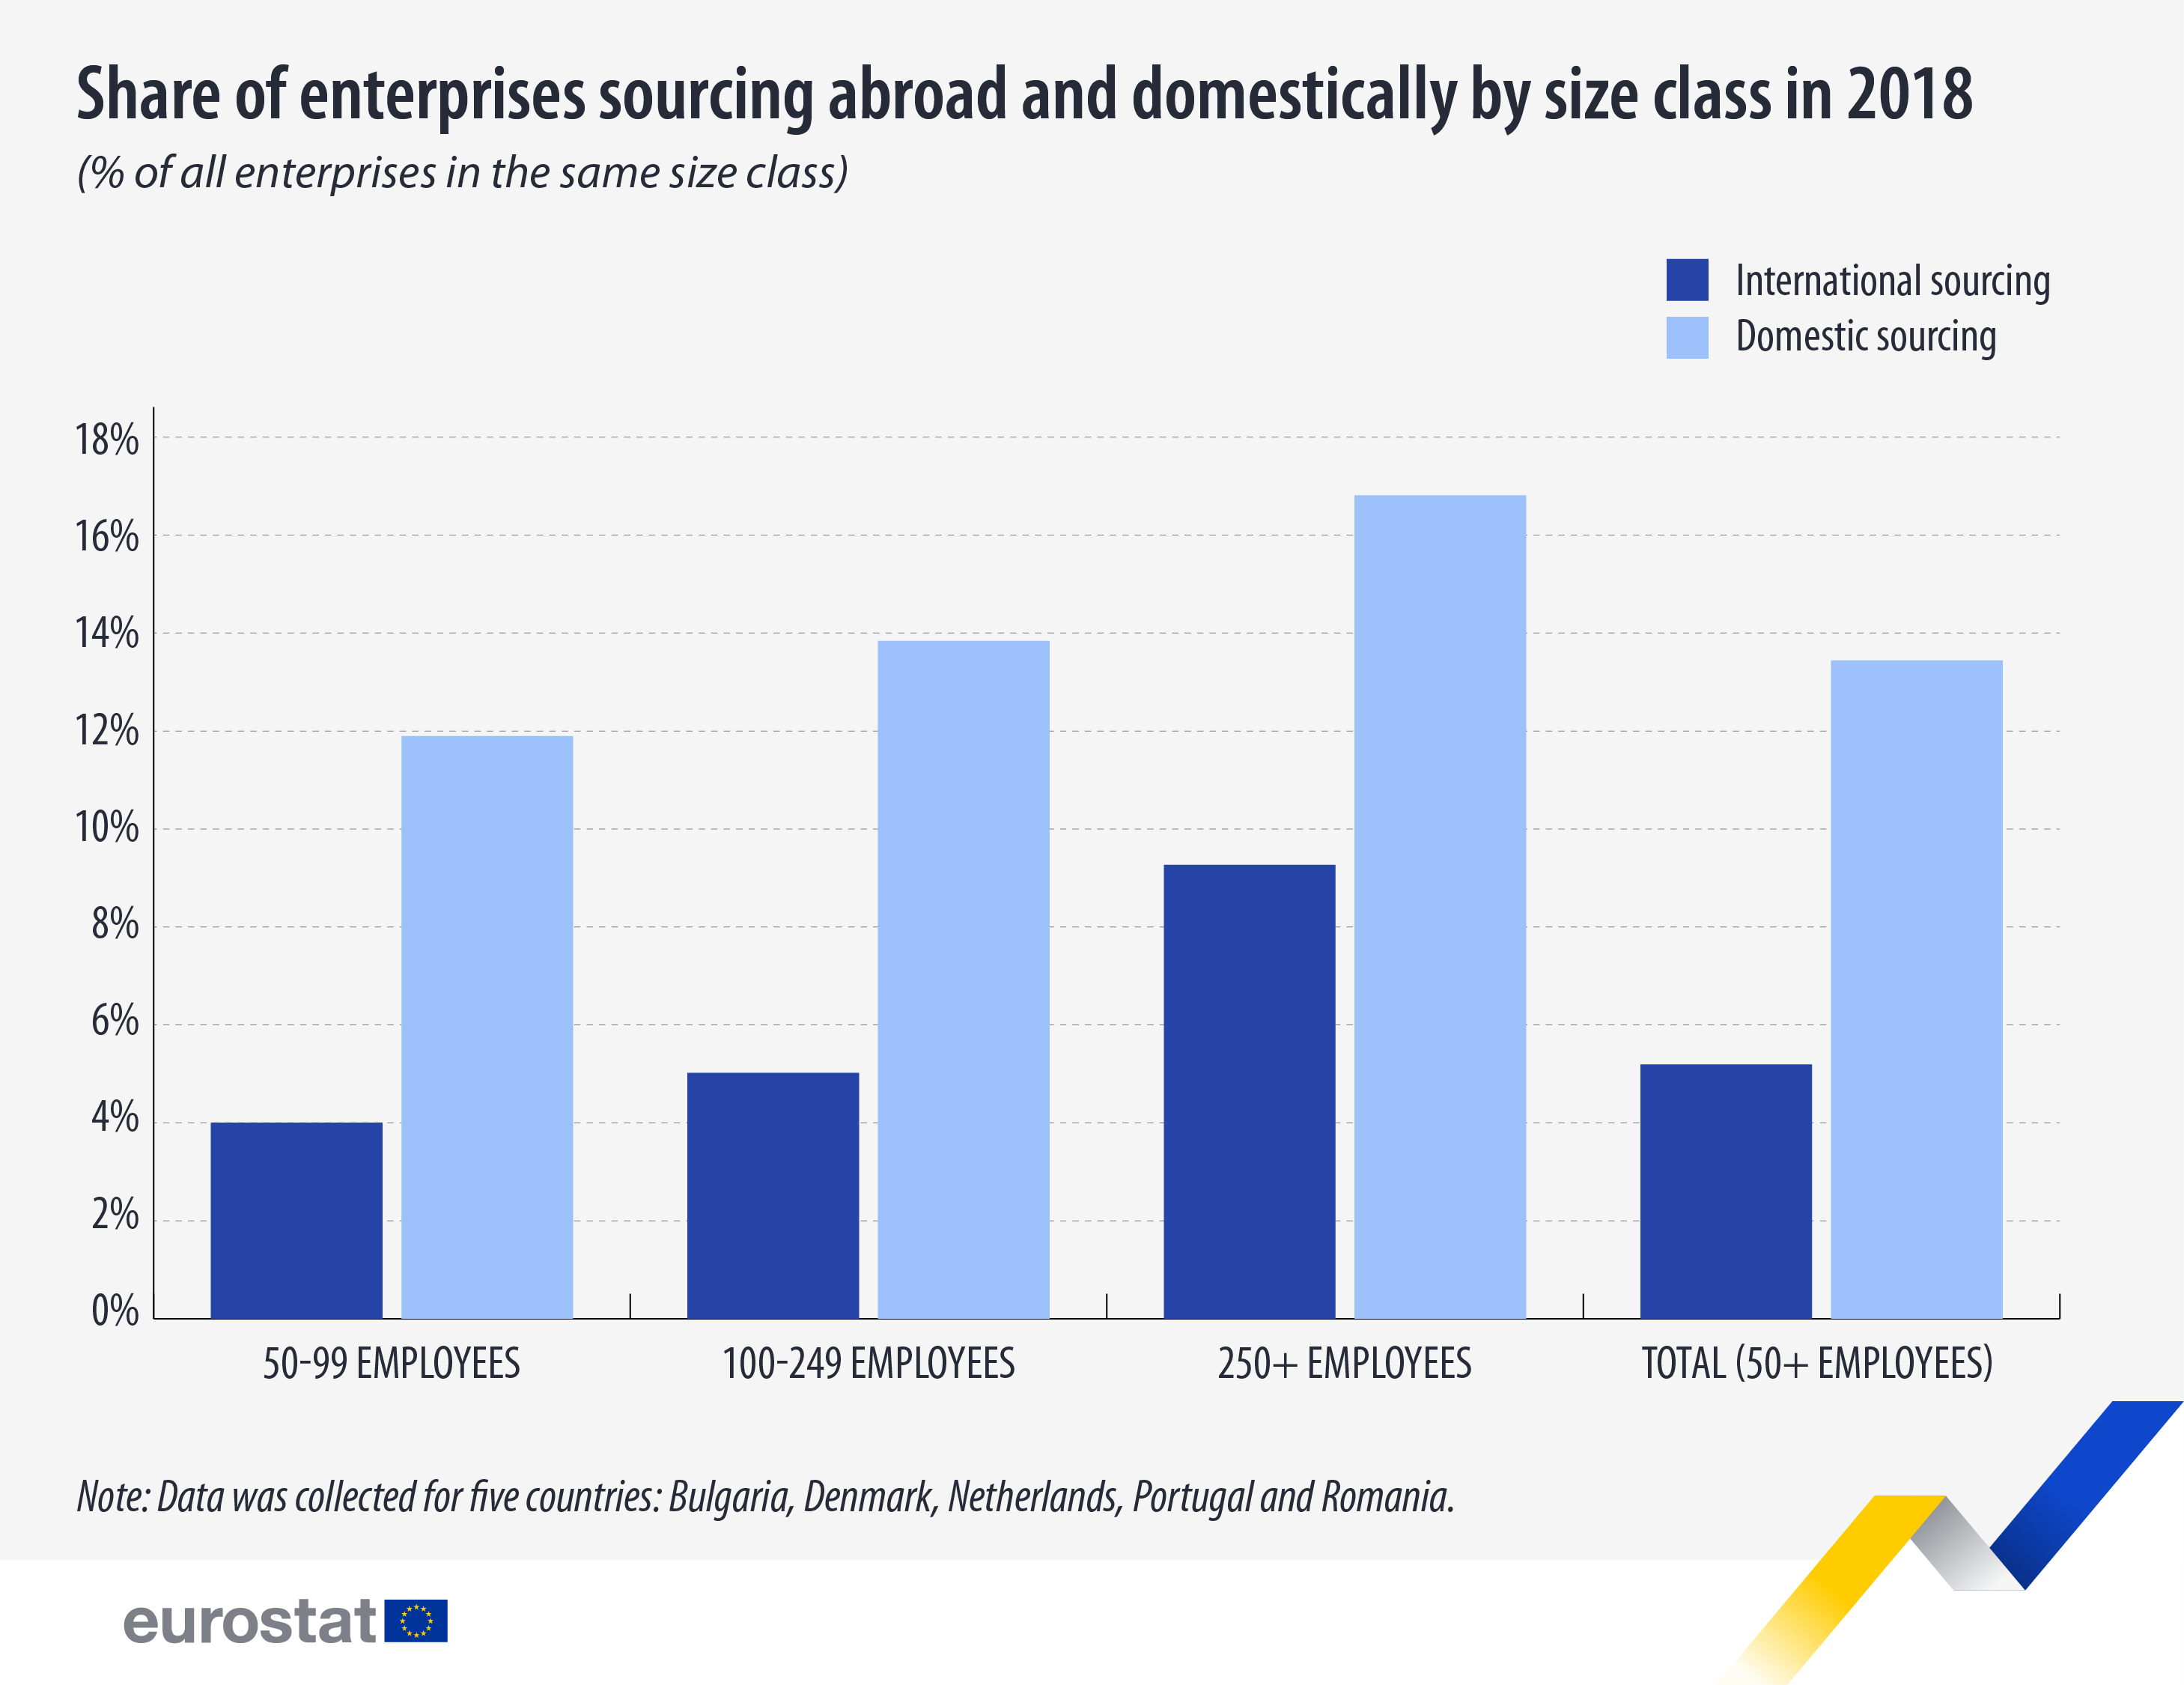 Bar graph: Share of enterprises sourcing abroad and domestically by size class in 2018, % of all enterprises in the same size class